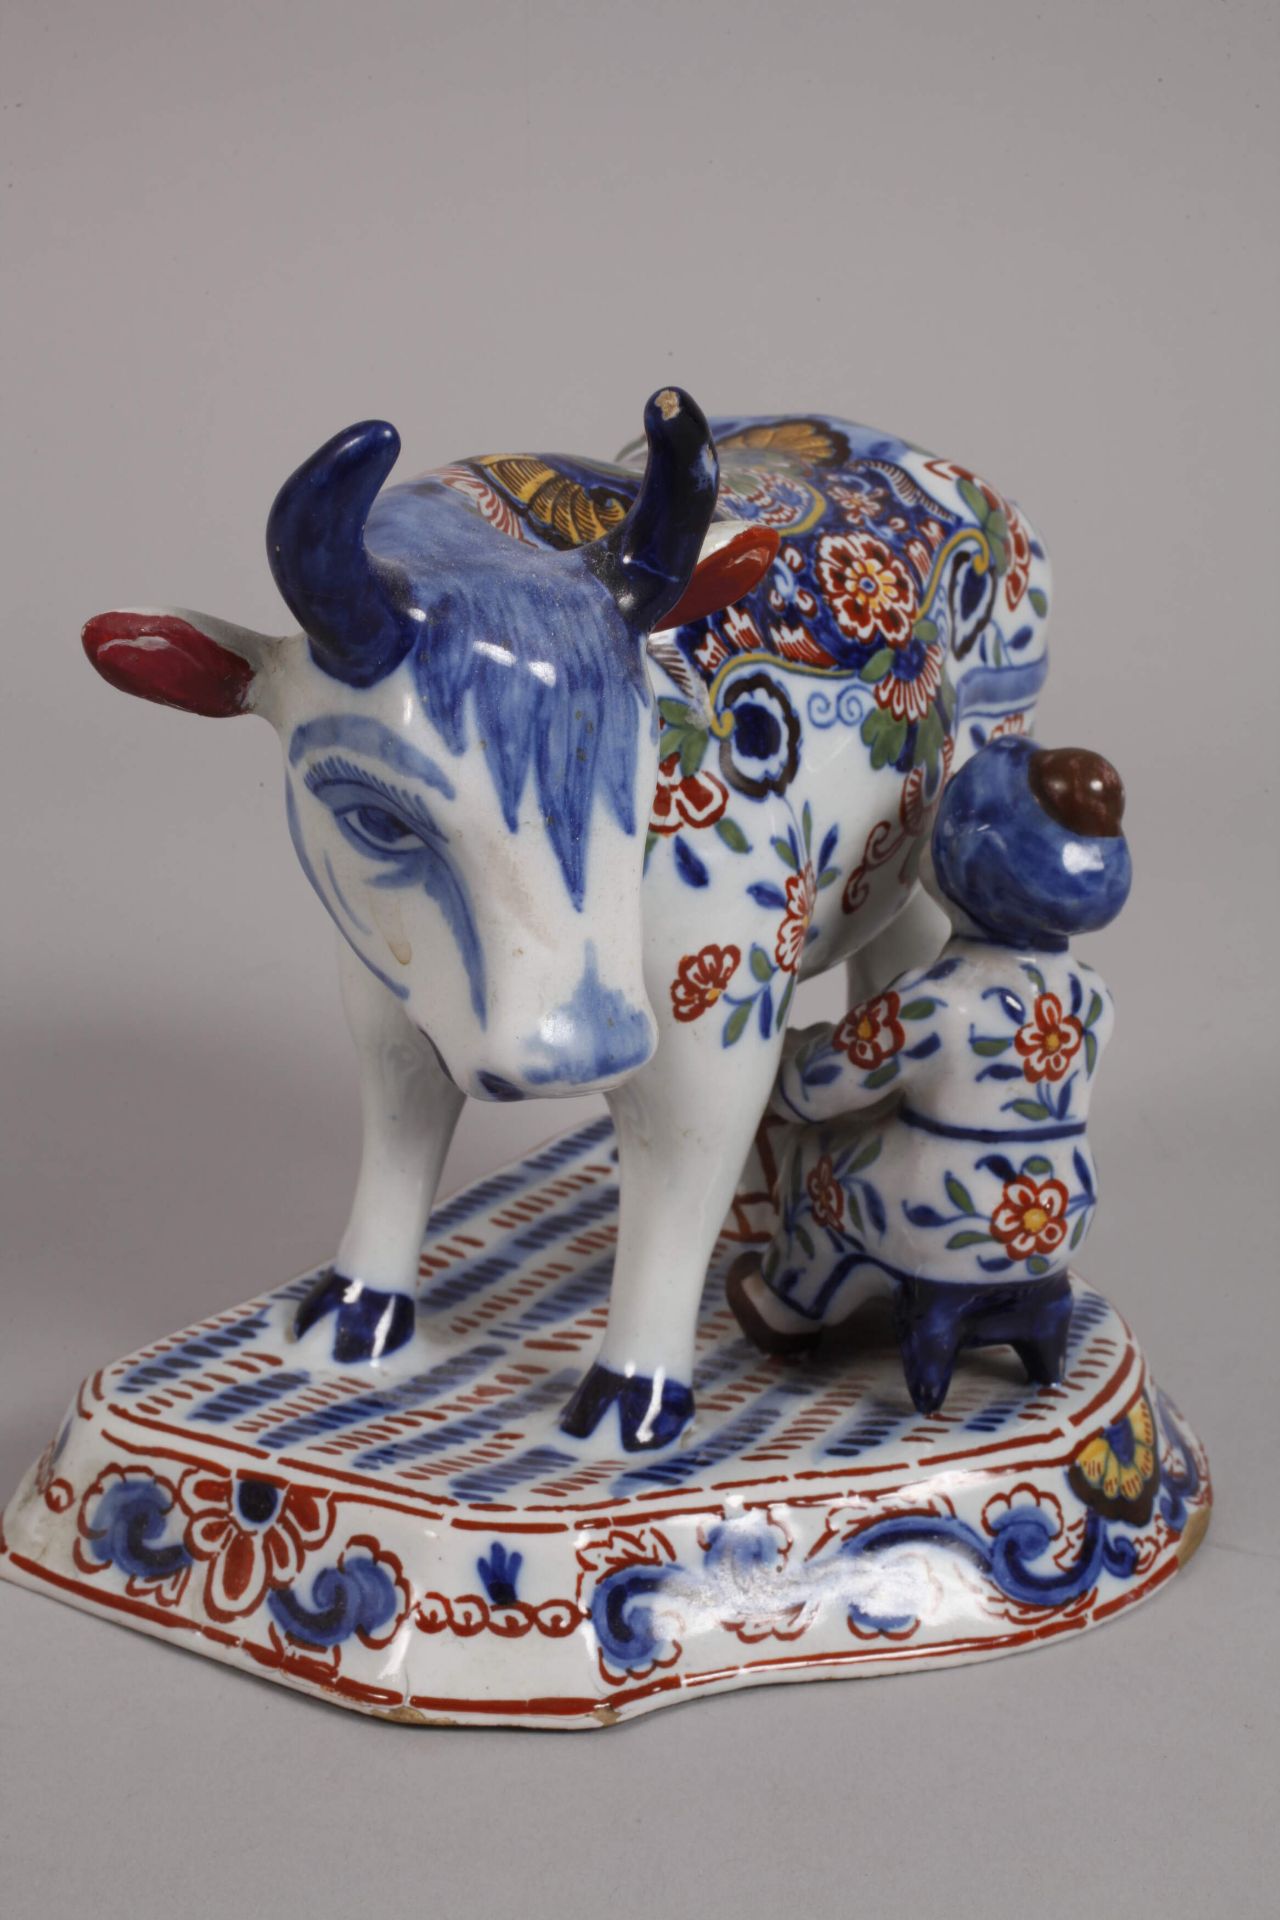 Delft faience farmer's wife with cow - Image 3 of 5